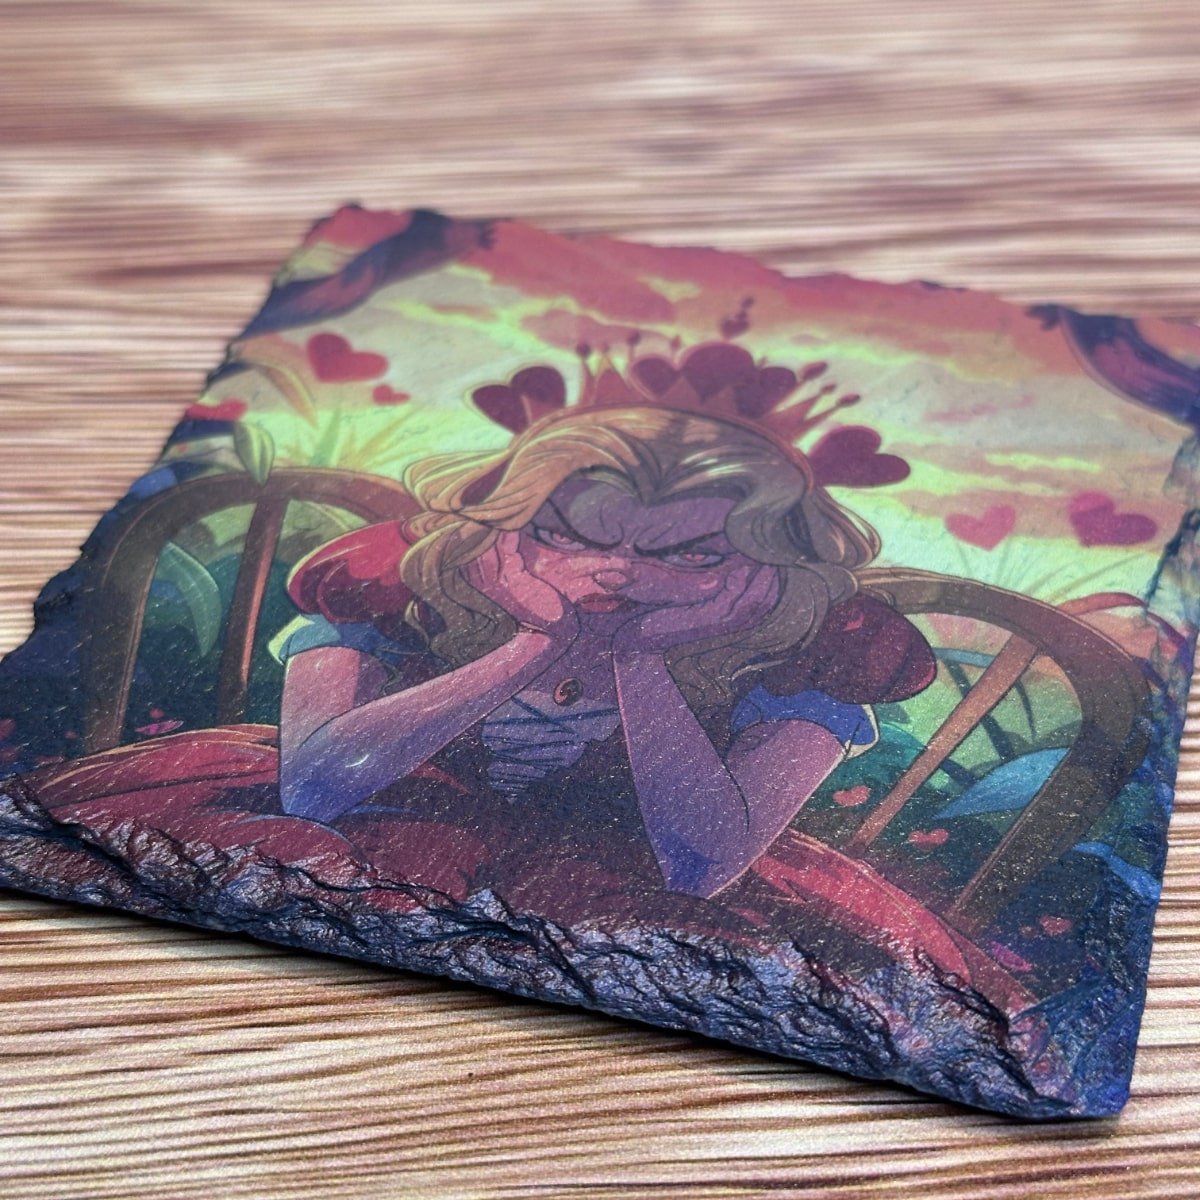 Alice in Wonderland Anime Style Slate Coaster - Queen of Hearts - GameOn.games